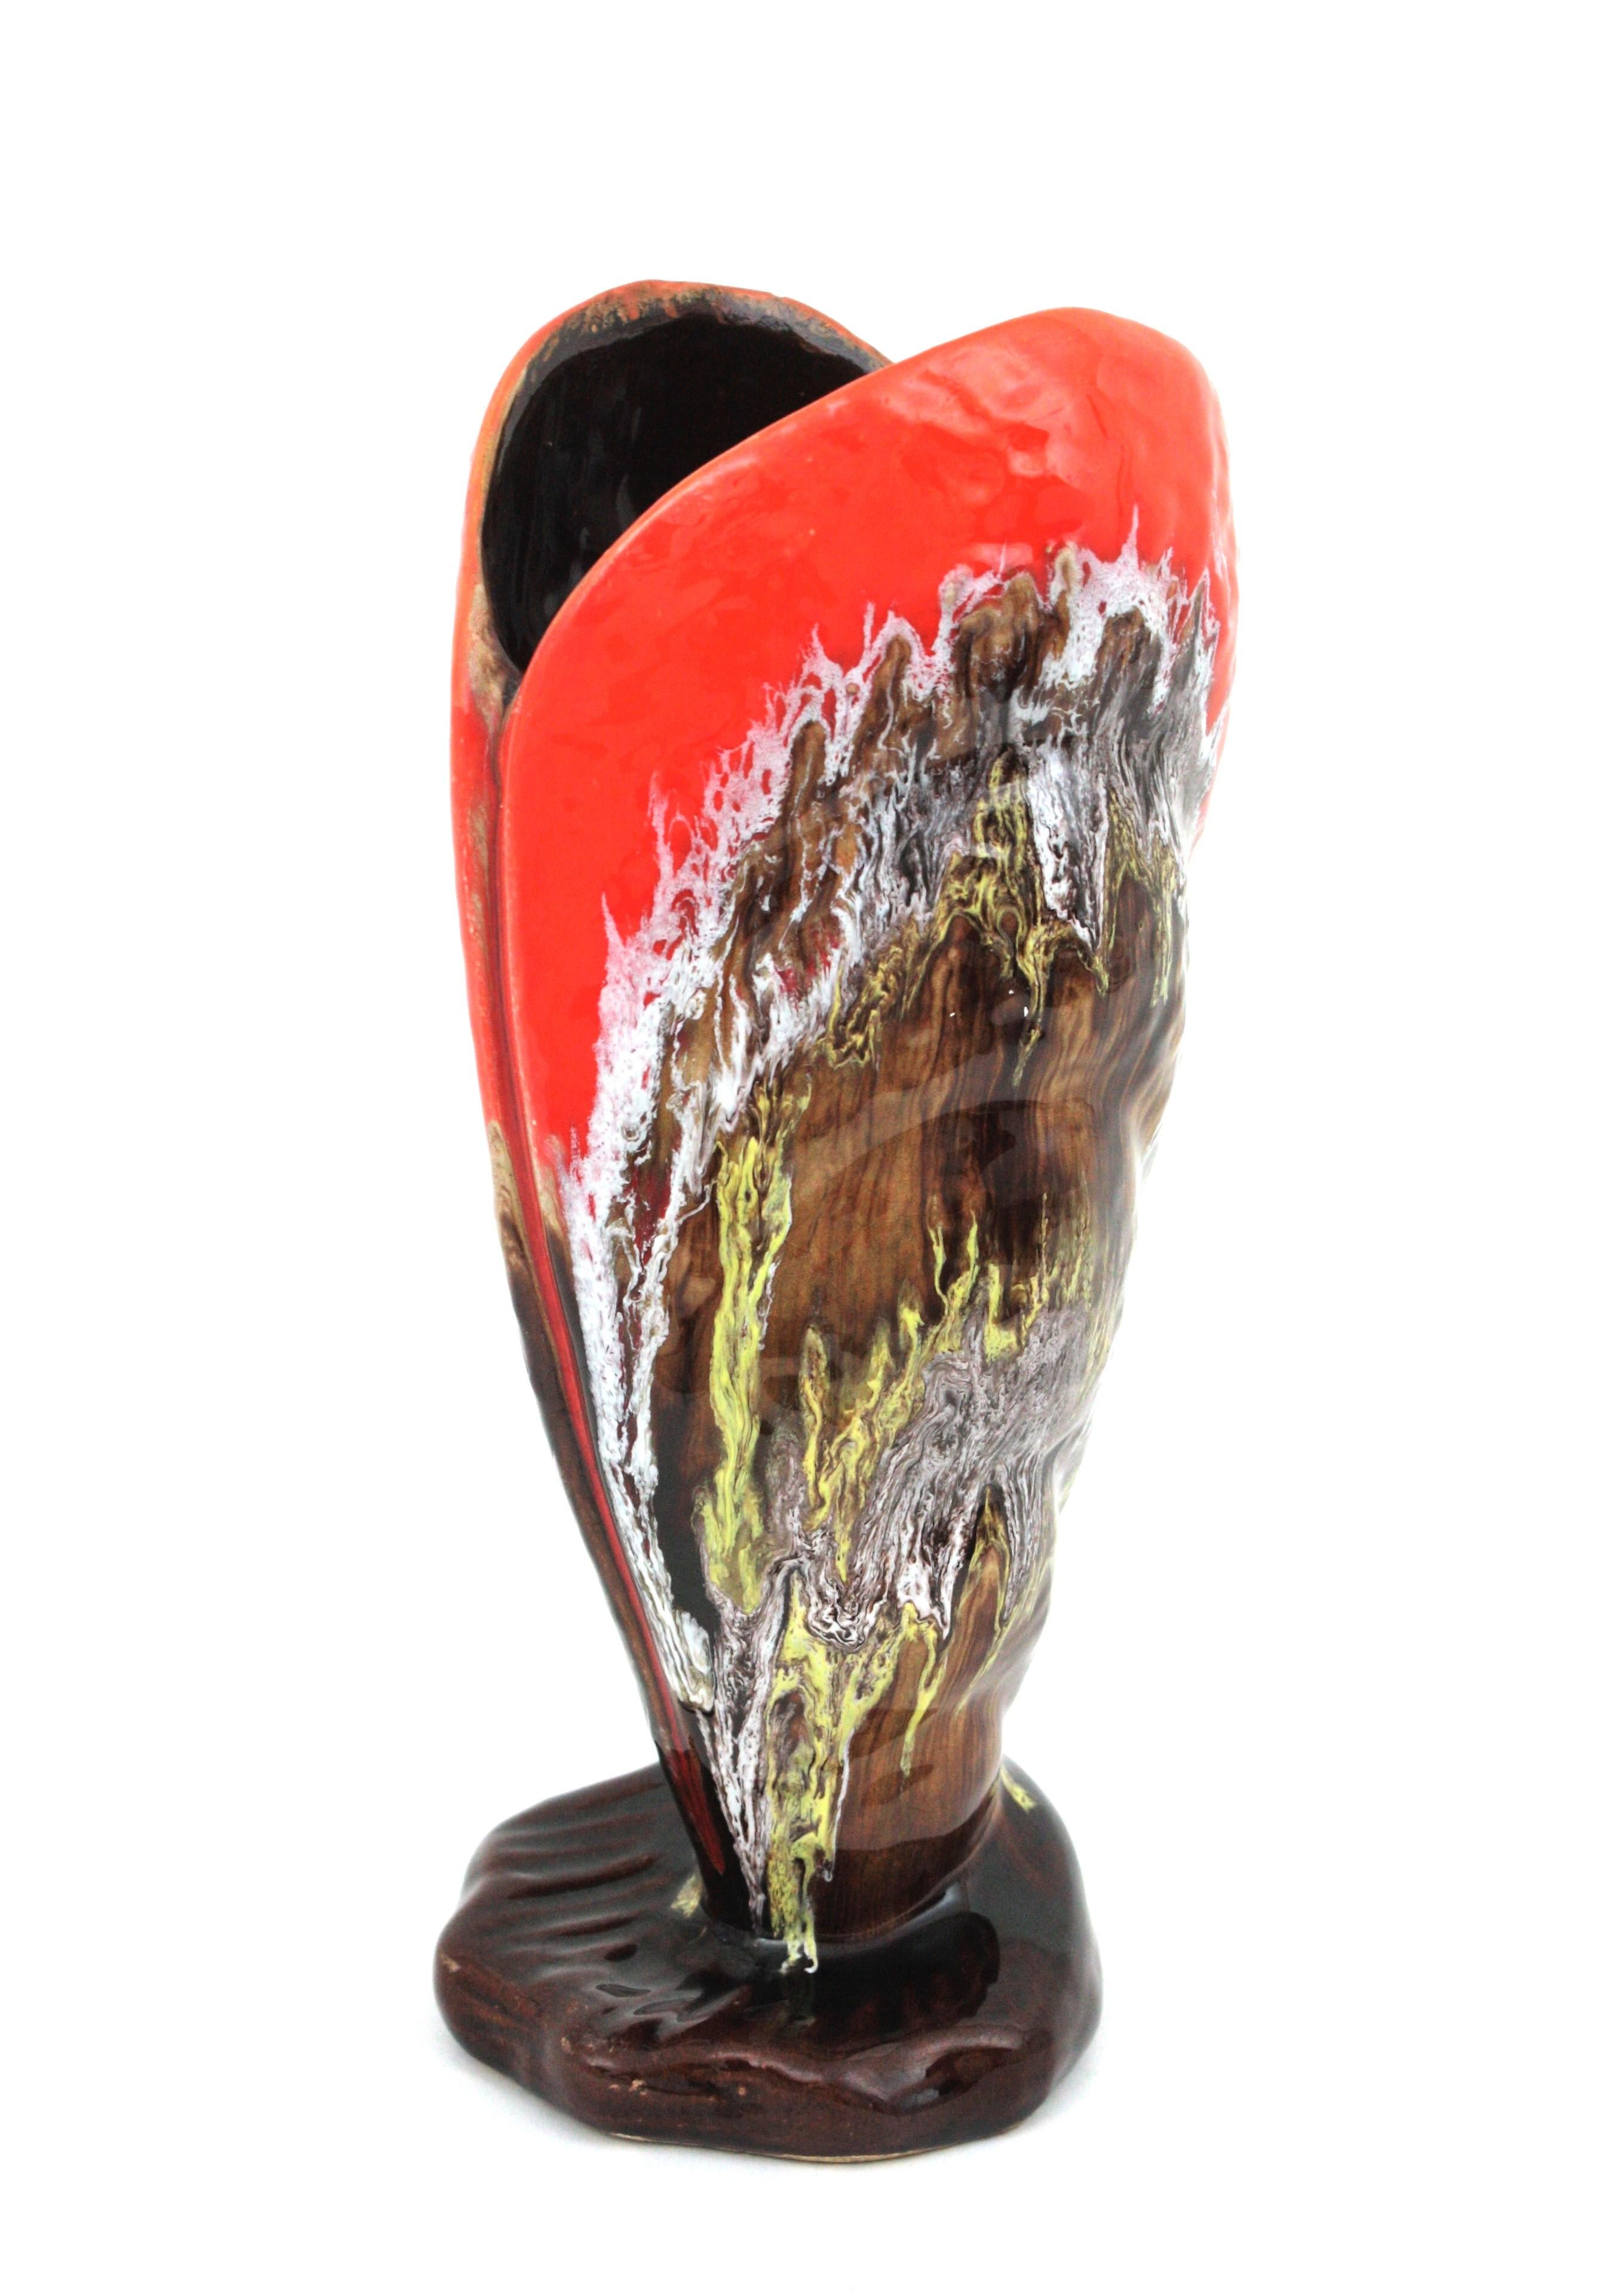 Large Vallauris Majolica Shell Shaped Vase, Orange and Brown Glazed Ceramic In Good Condition For Sale In Barcelona, ES